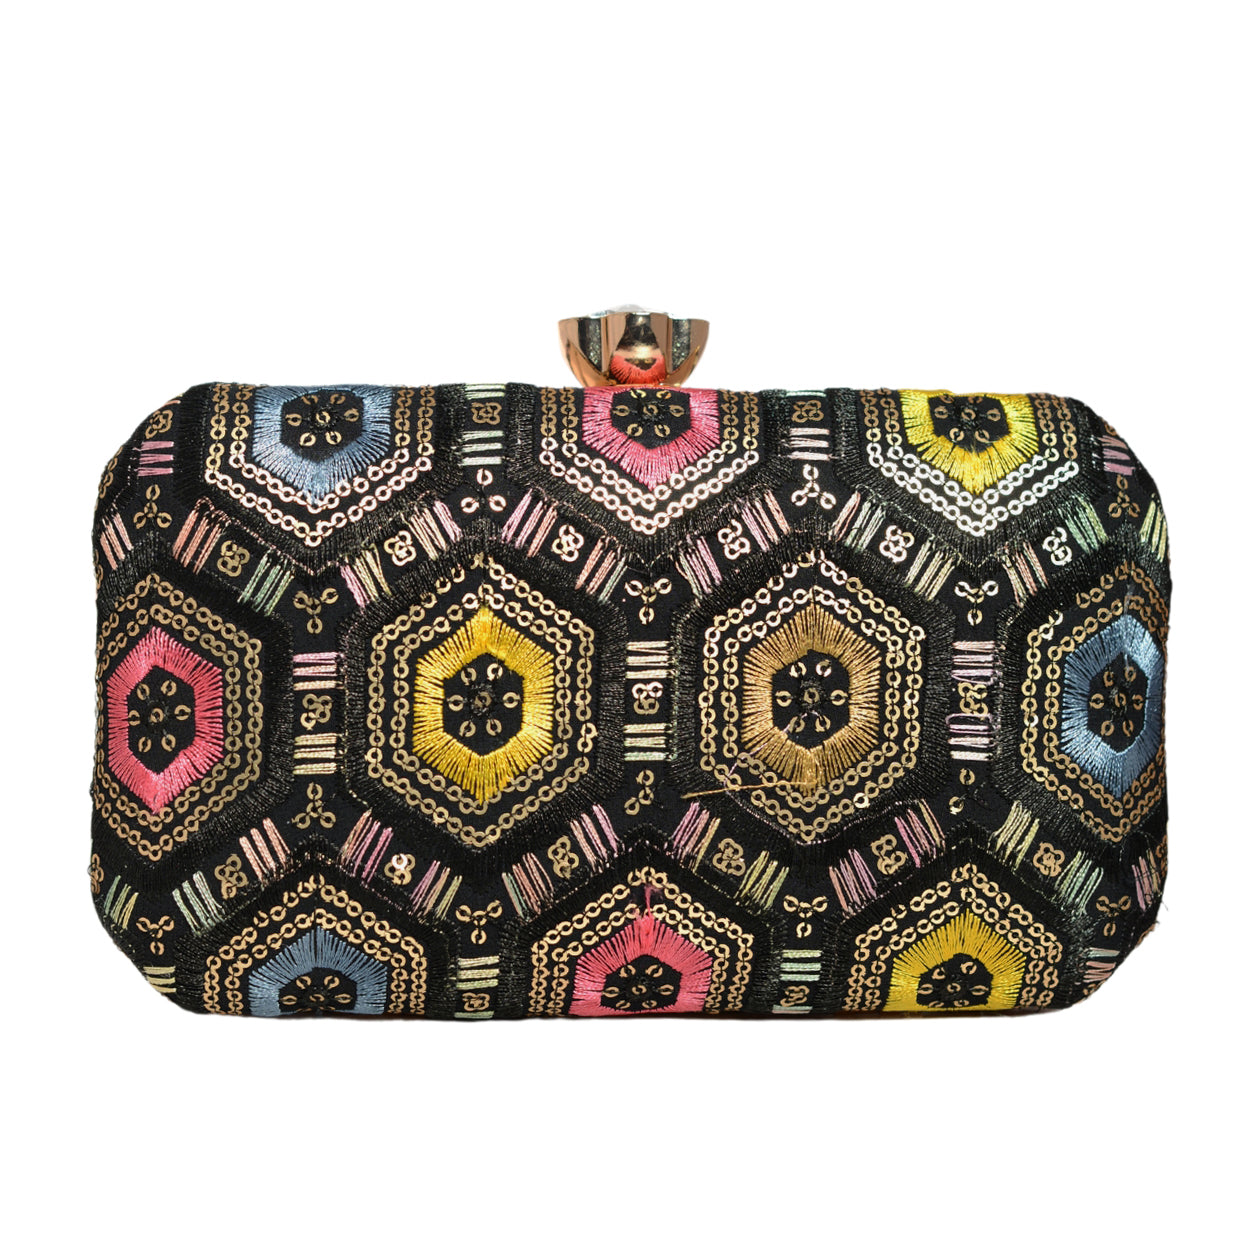 Black Rectangle Sequins Embroidery Clutch